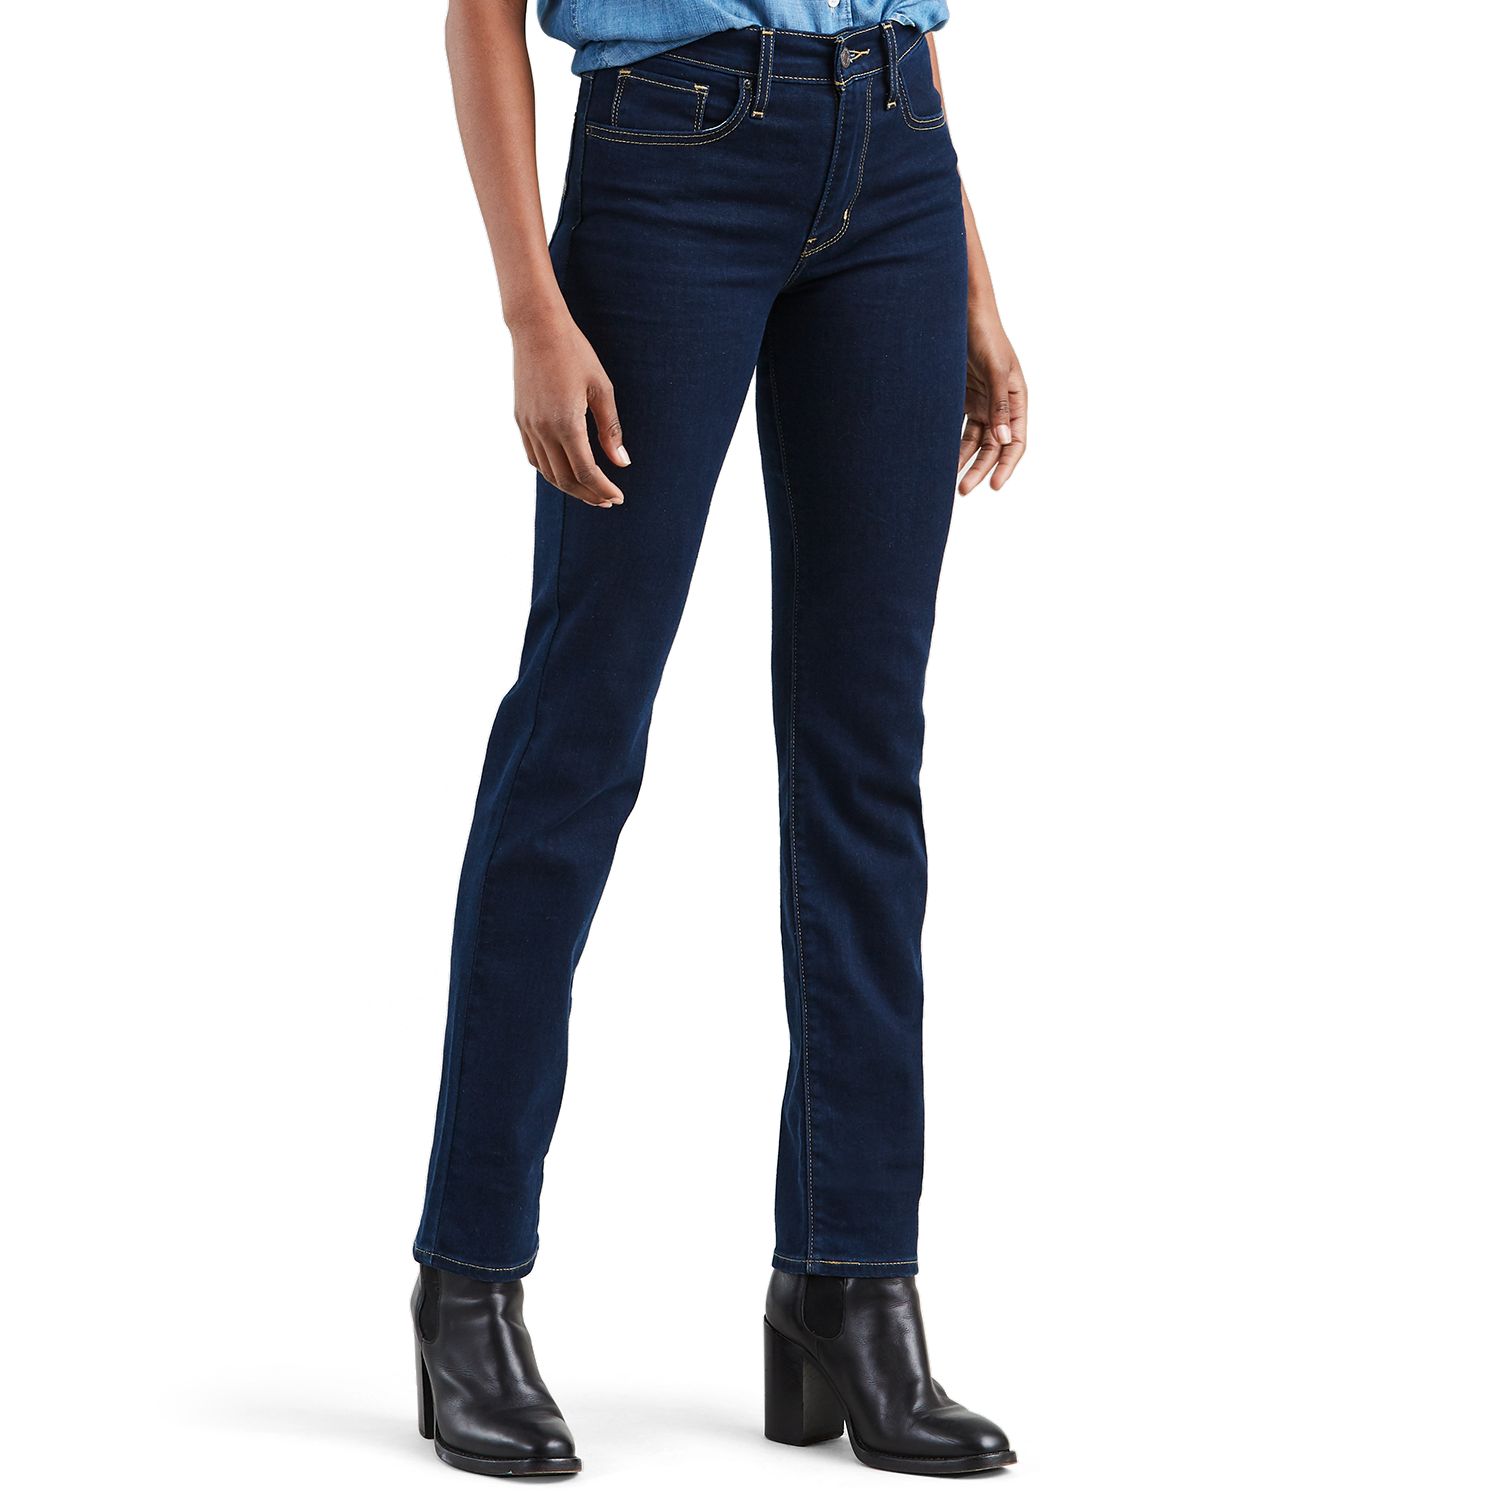 Image for Levi's Women's 724 High-Waisted Straight-Leg Jeans at Kohl's.